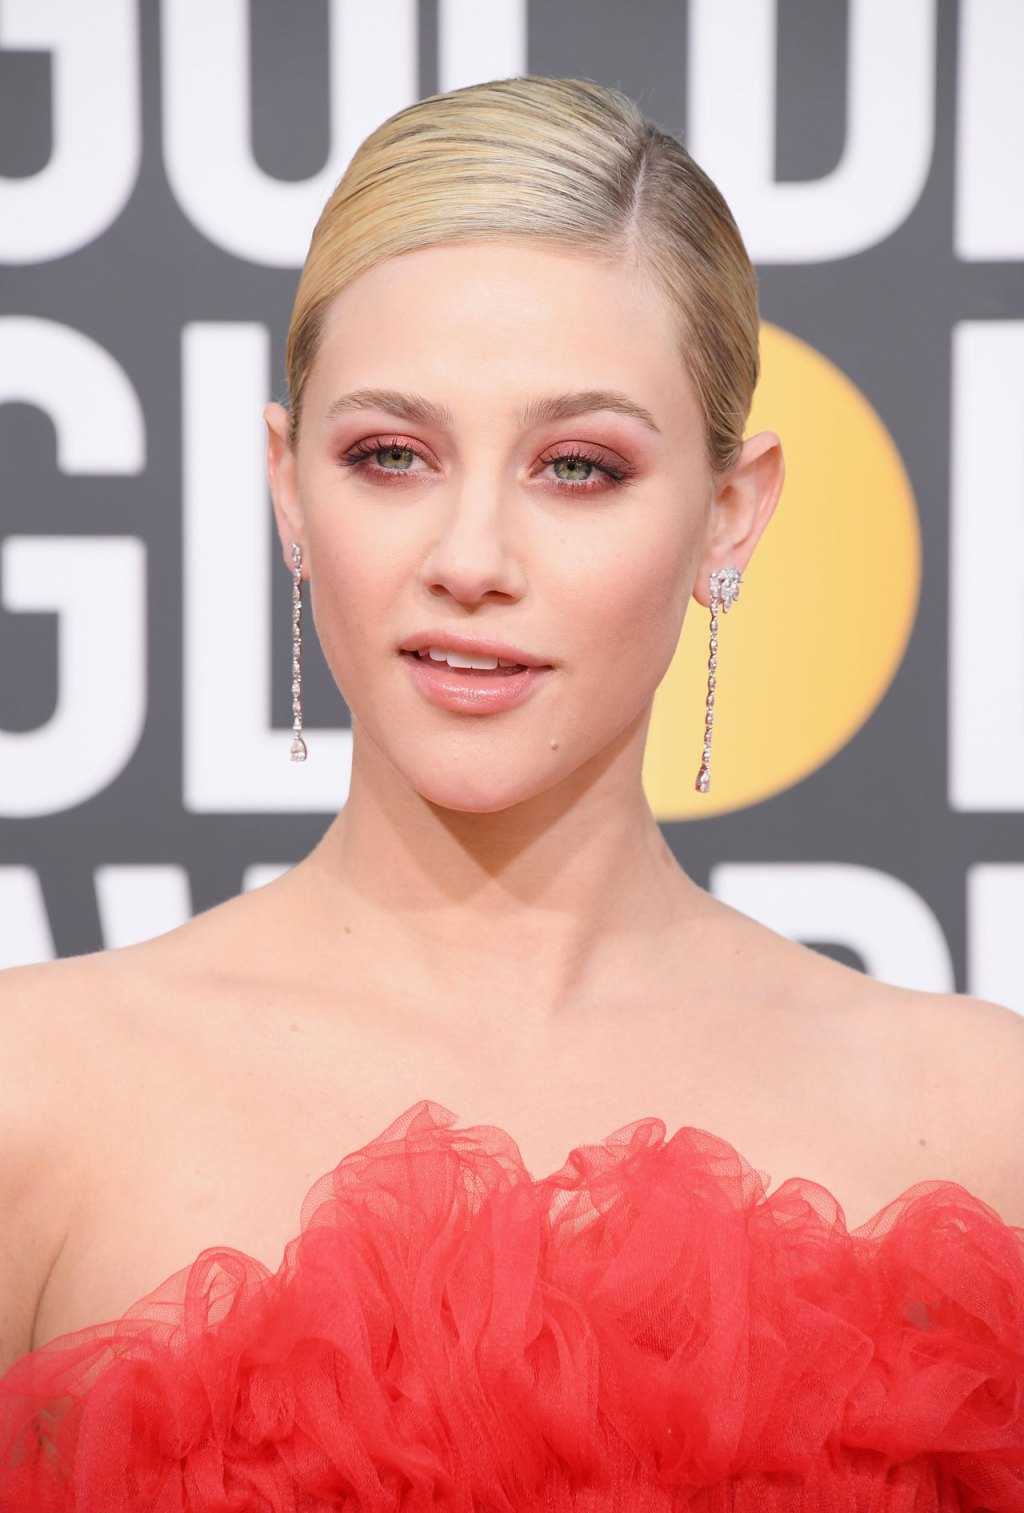 65+ Hot Pictures of Lili Reinhart From Riverdale | Best Of Comic Books